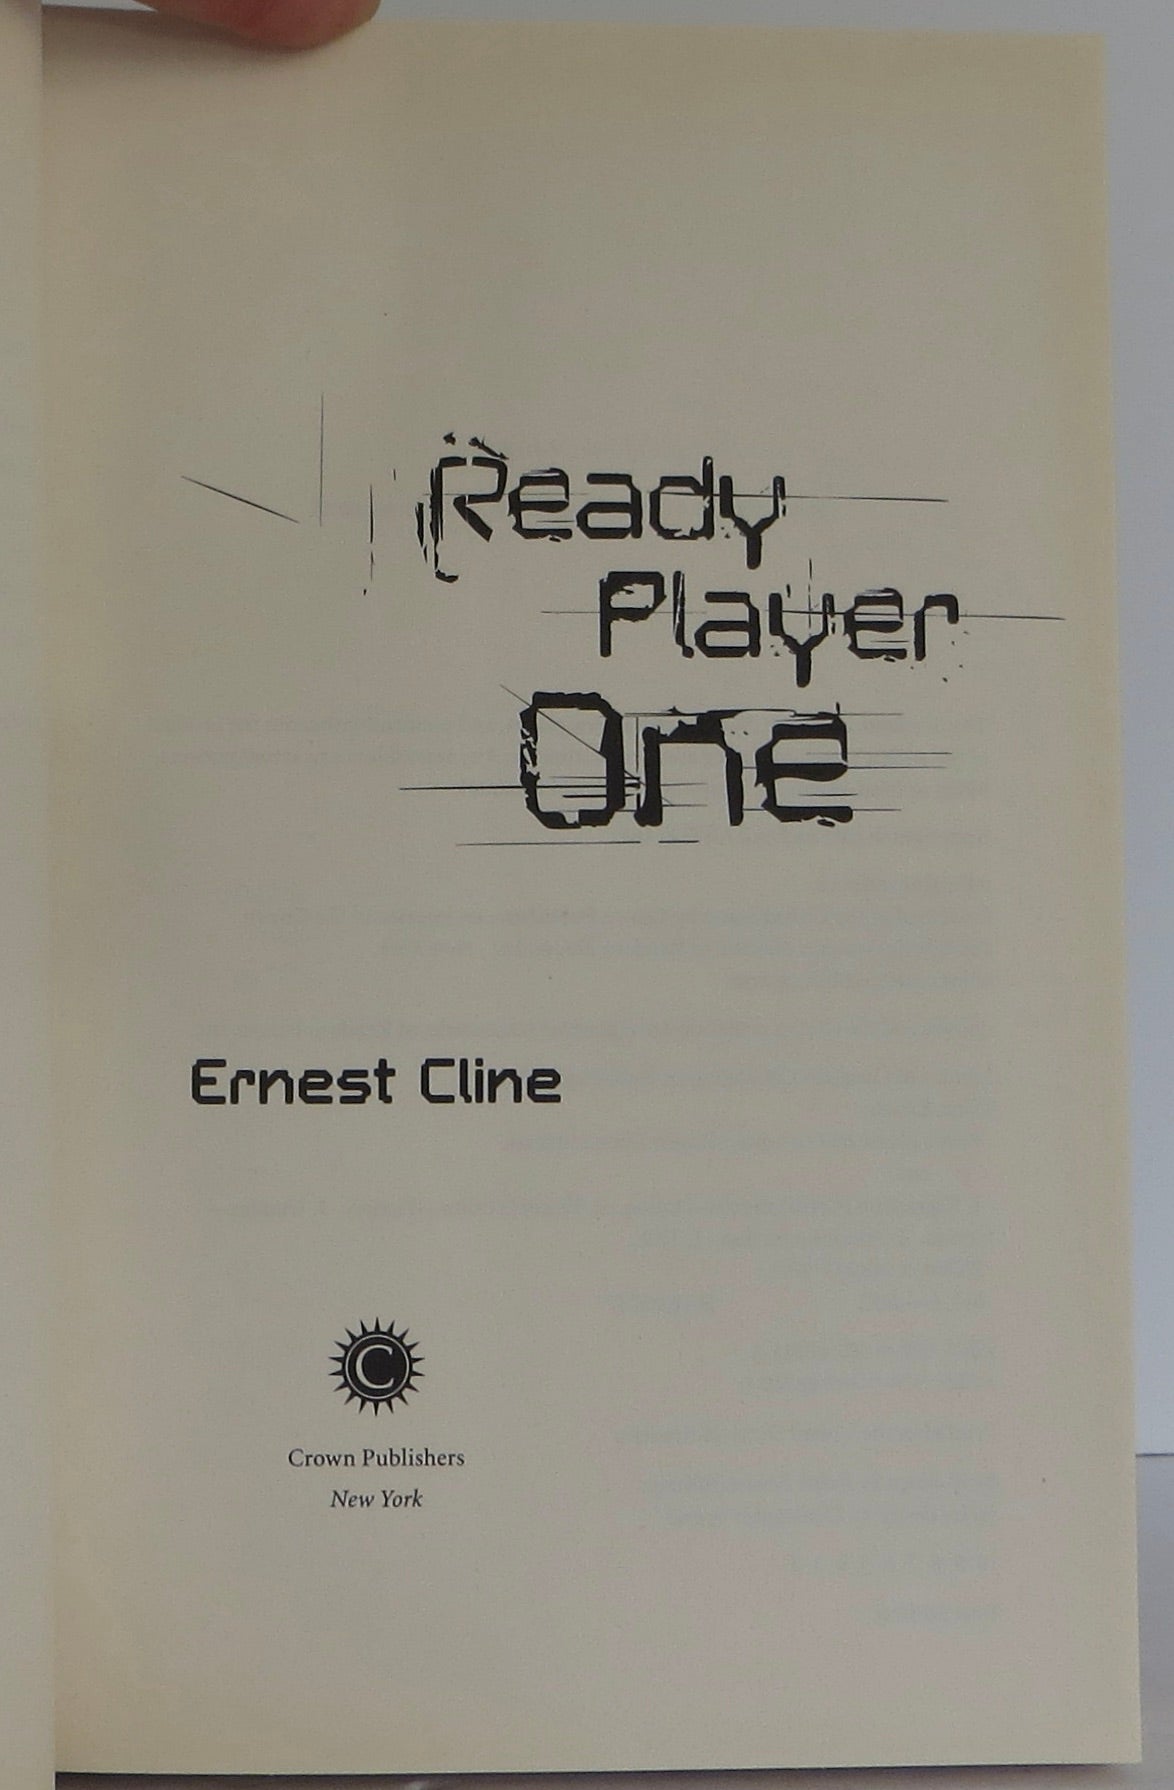 Ready Player One by Ernest Cline - First Edition - 2011 - from